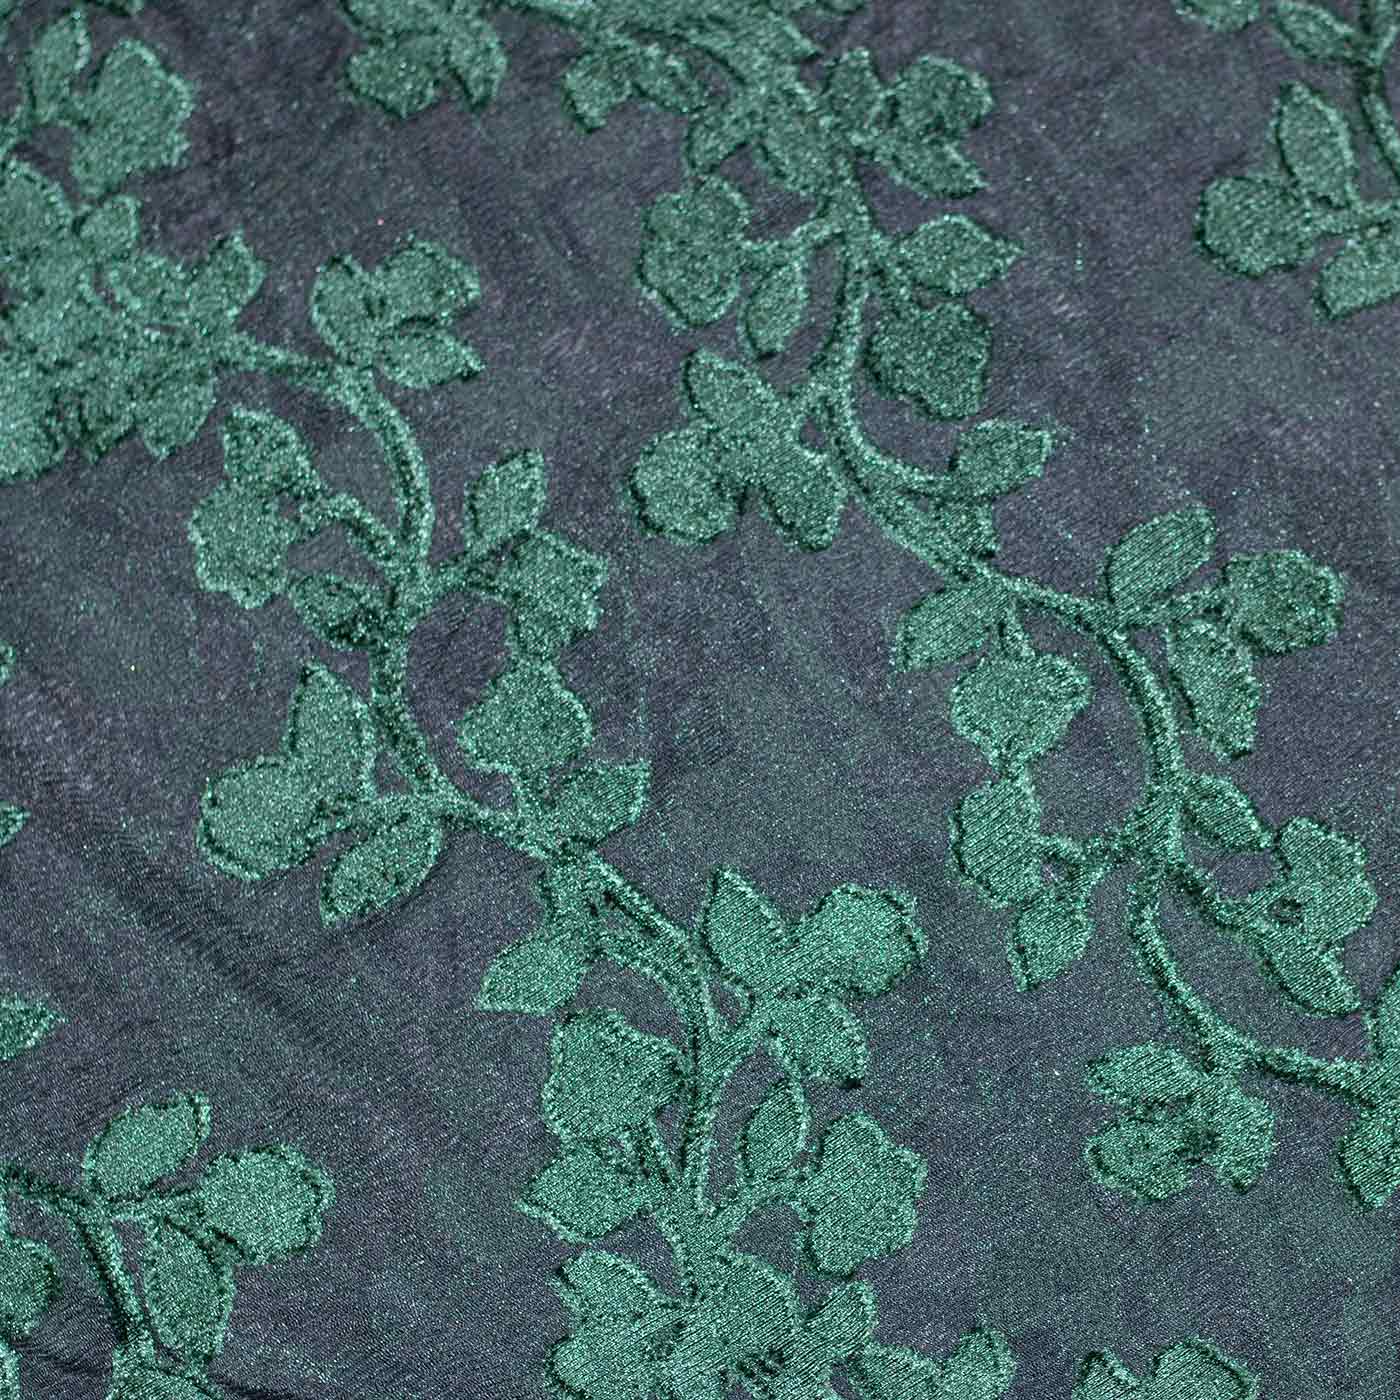 Green and Black High Quality Crushed Floral Velvet